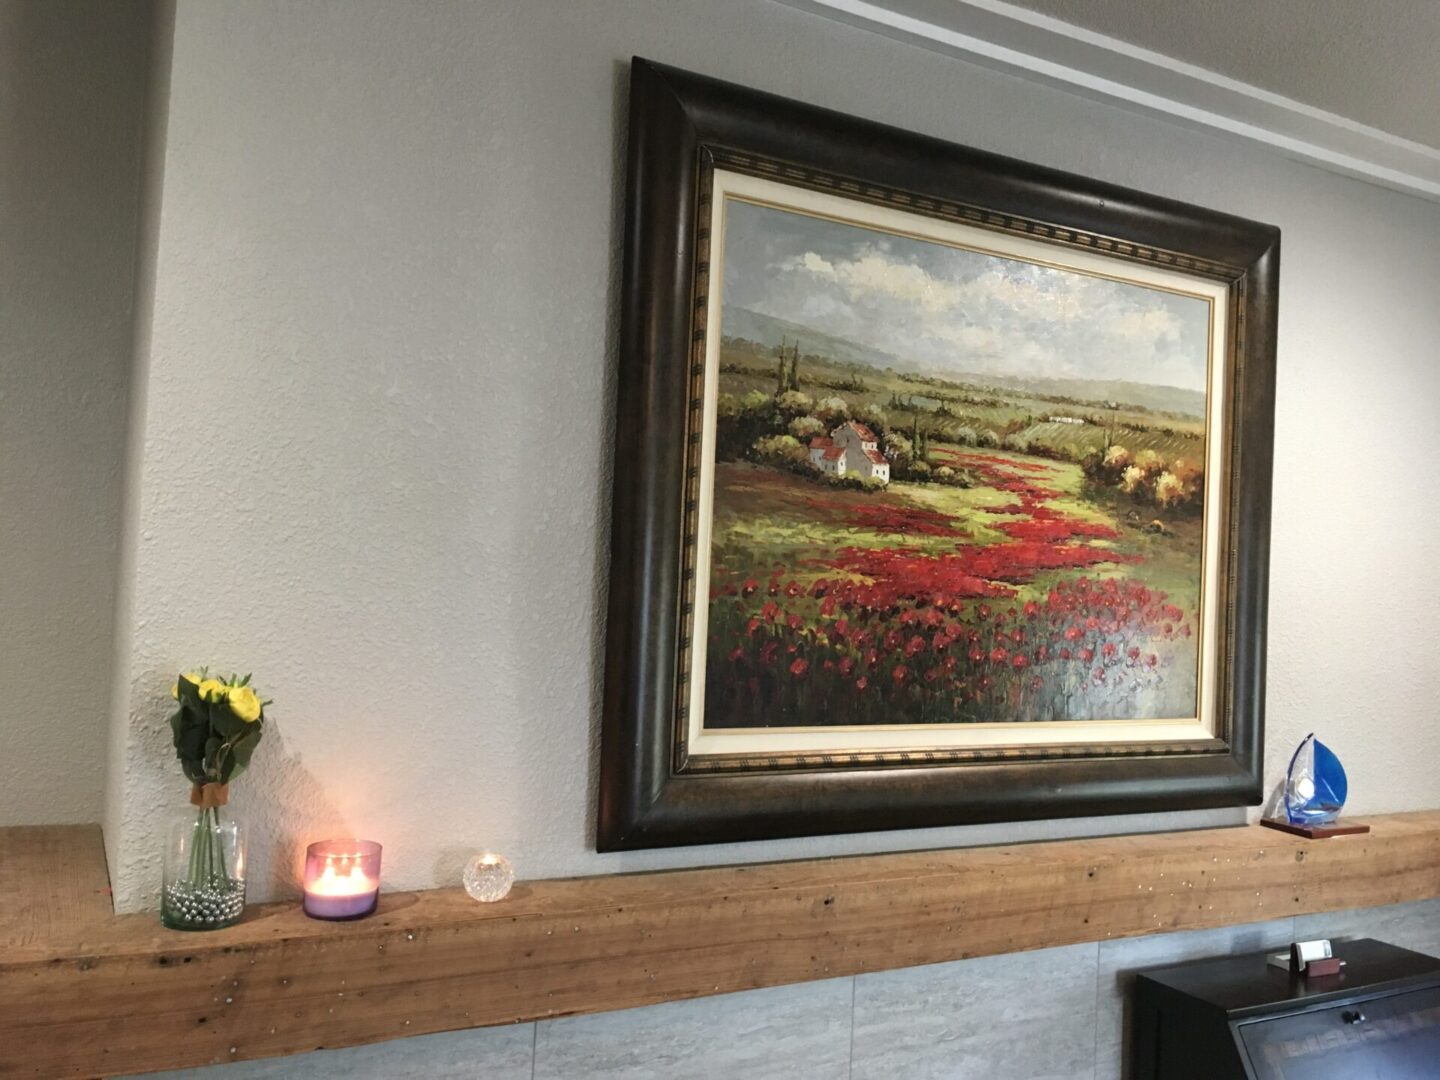 A painting of a field is on the wall above a fireplace.